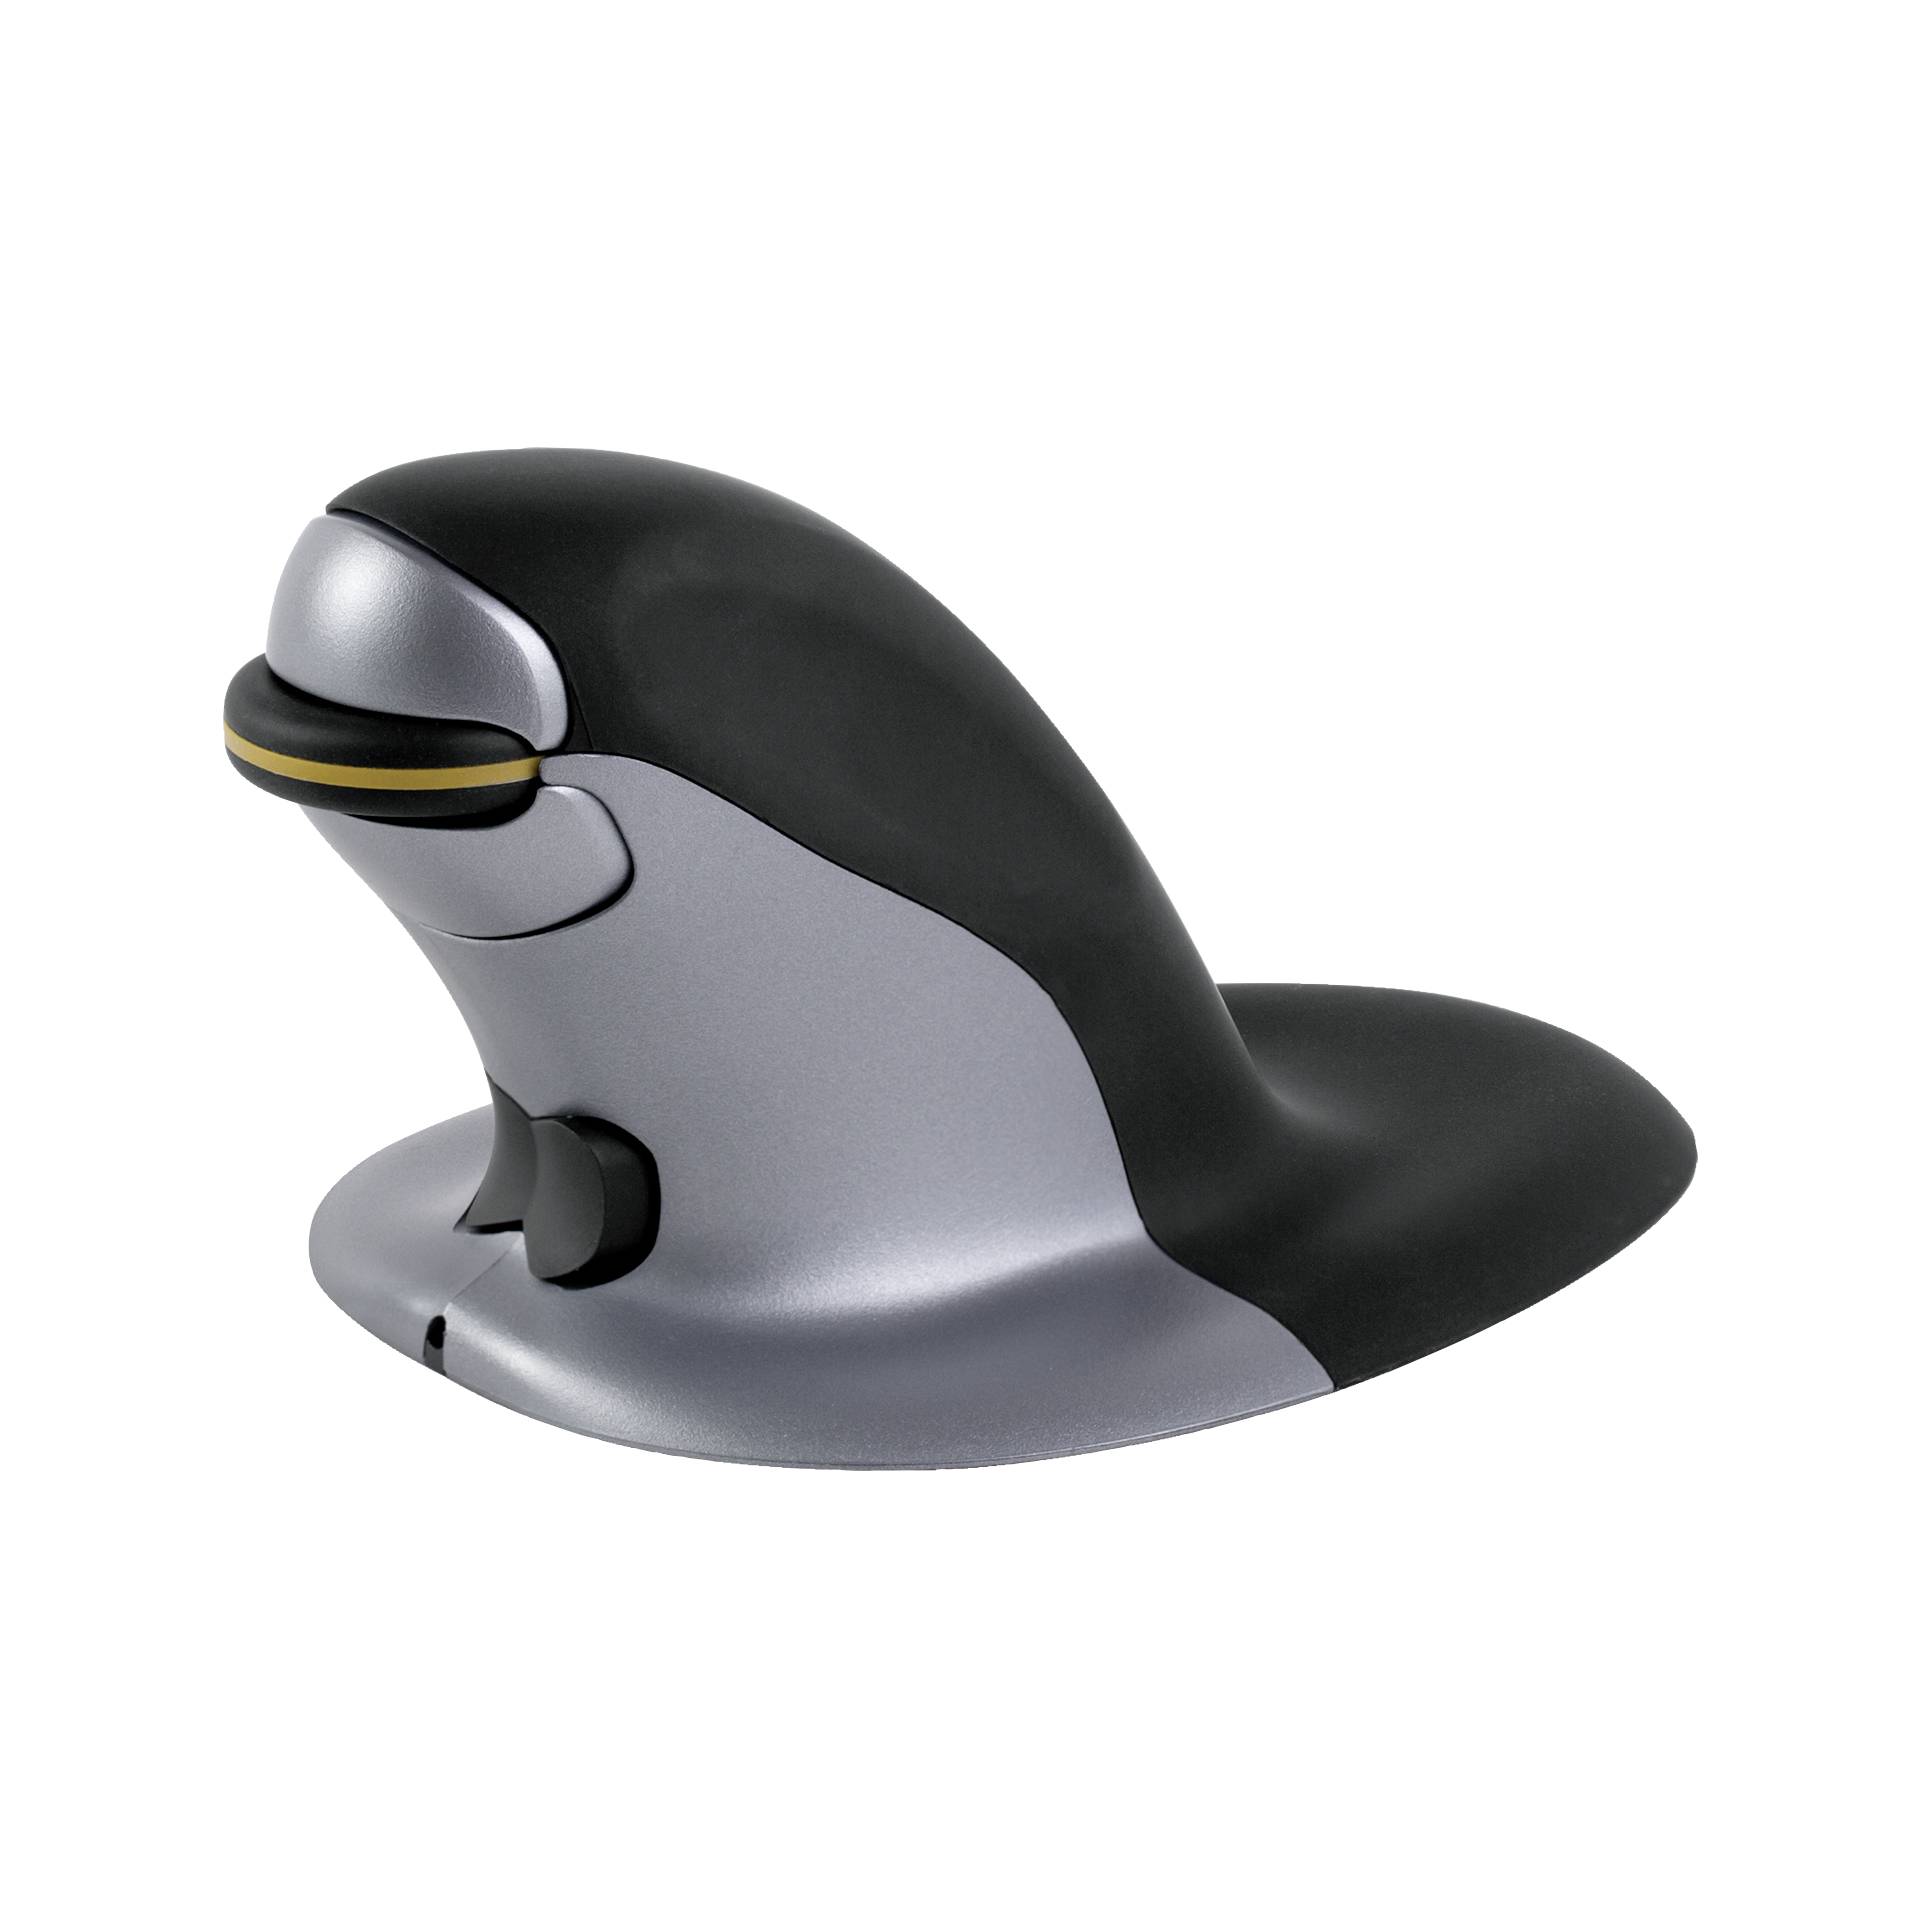 Fellowes Penguin ambidestro mouse verticale S - wireless